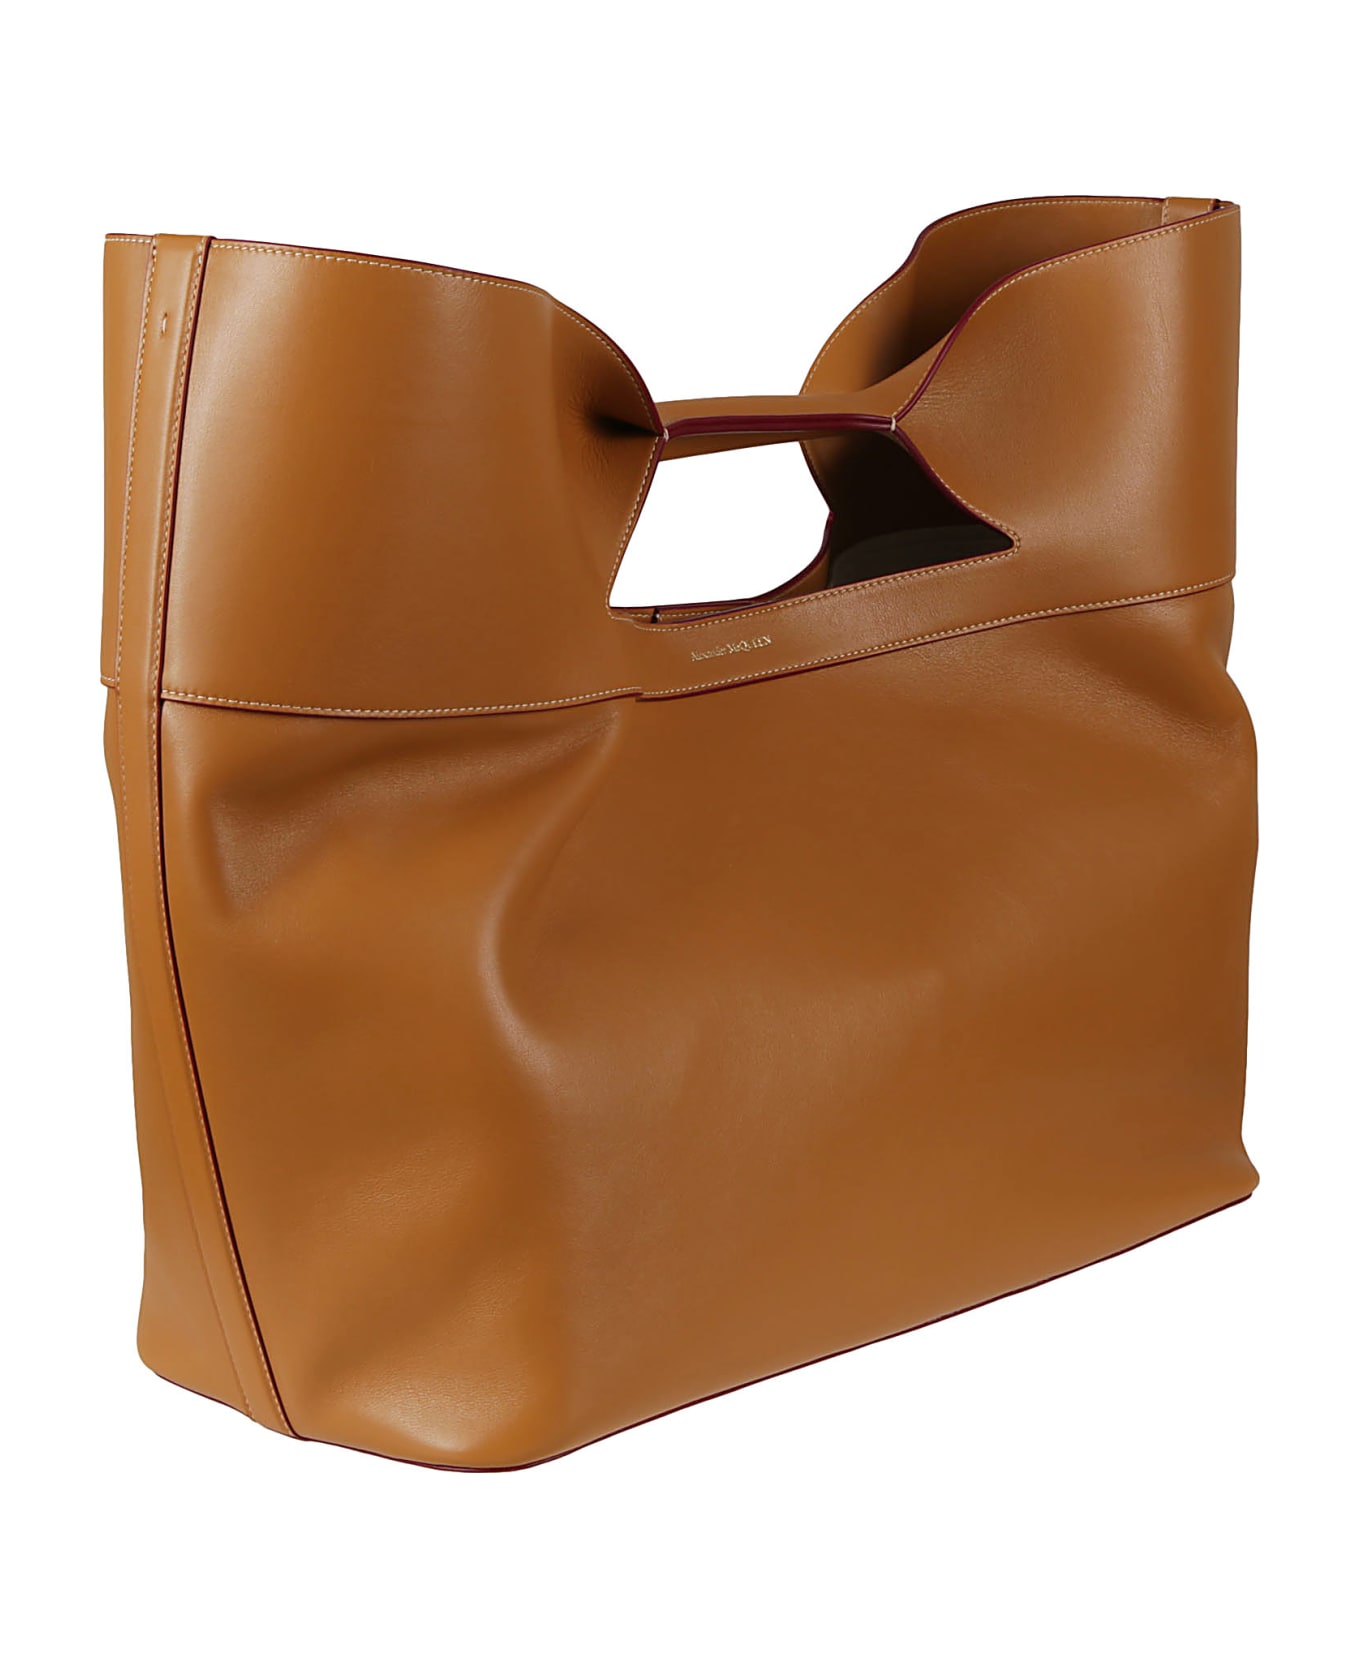 Alexander McQueen Large The Bow Tote - Cuoio